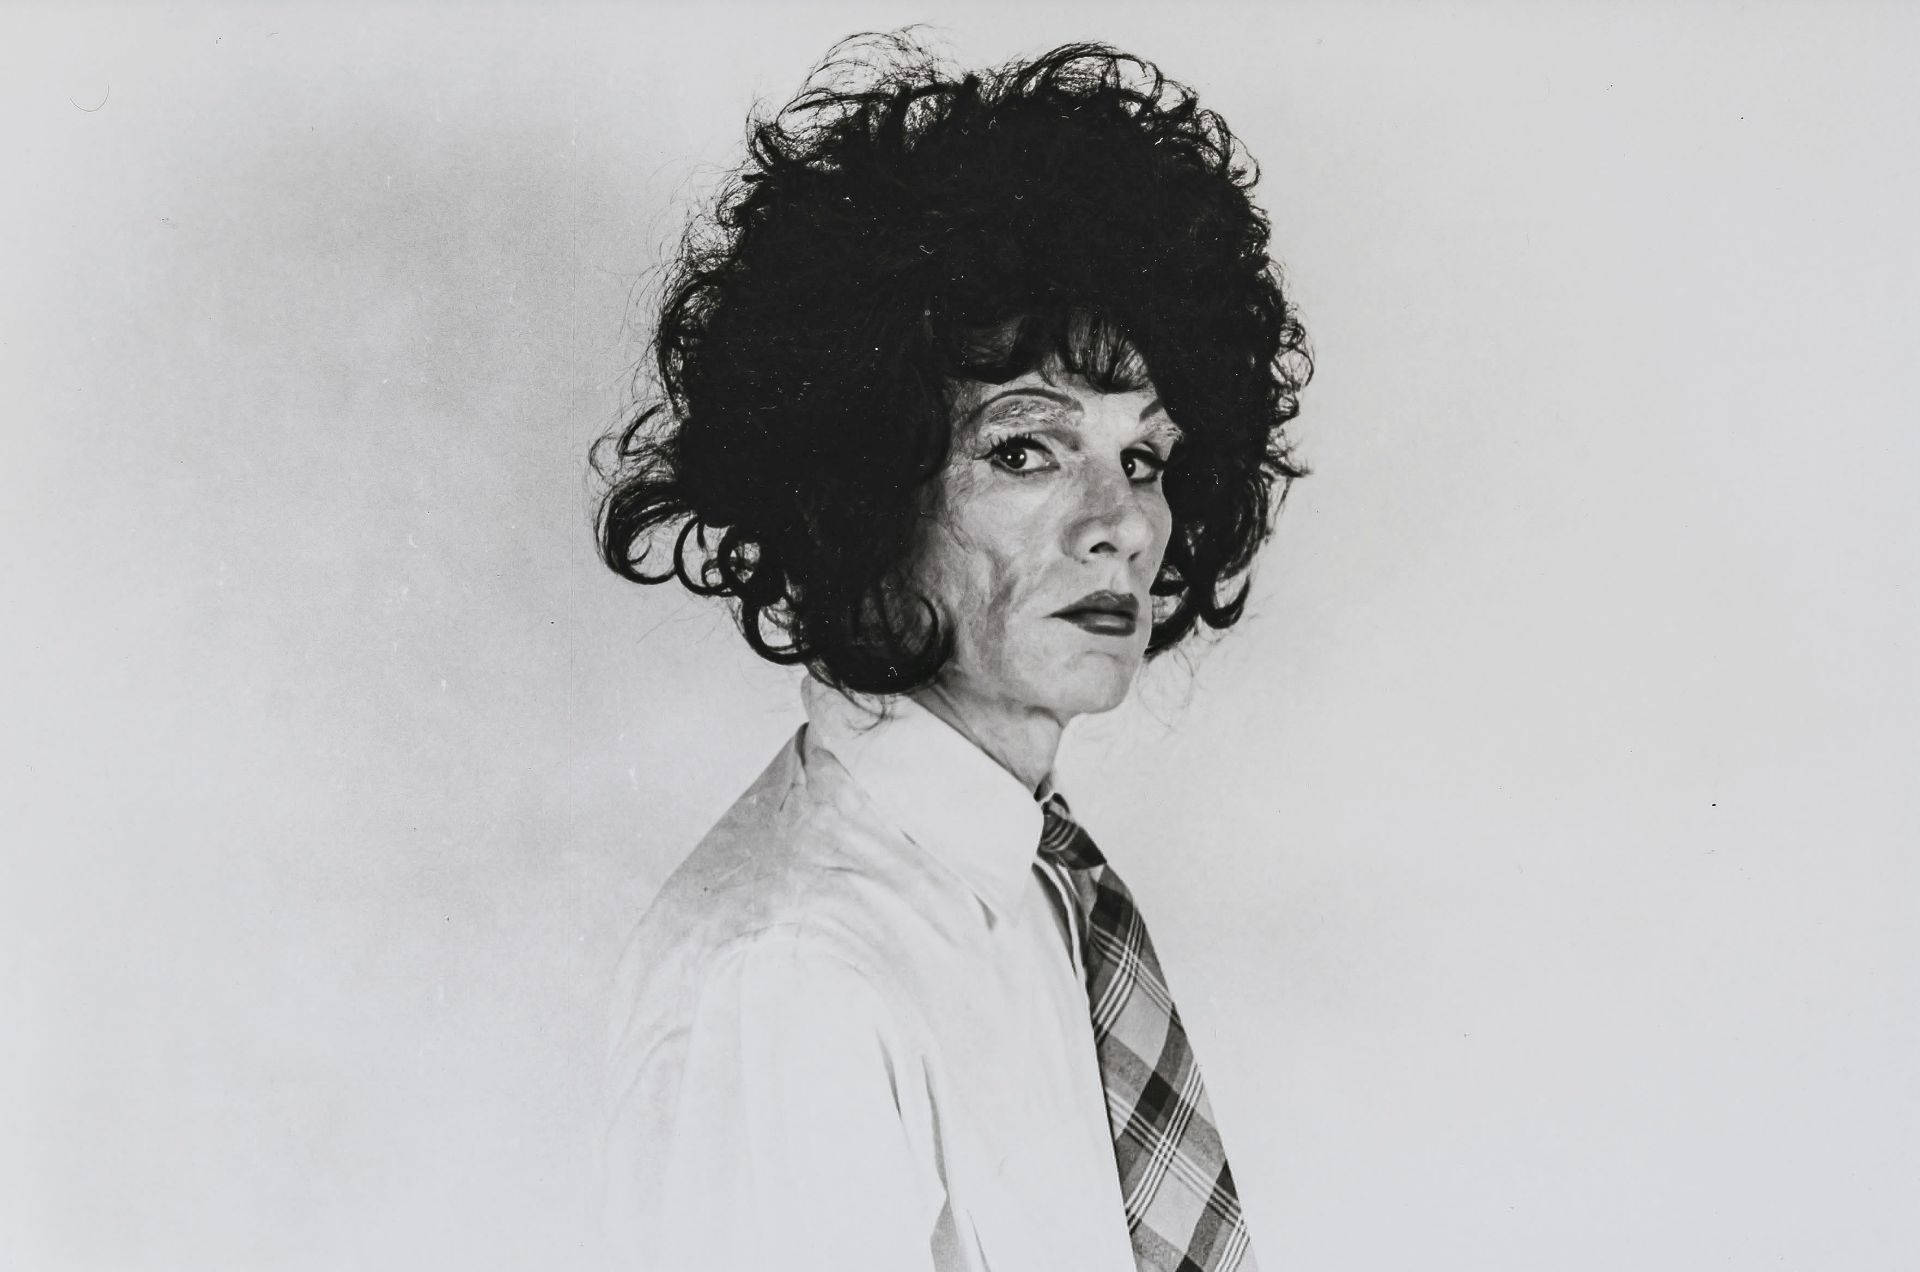 Christopher Makos - Andy Warhol with 6 different wigs from the Altered Images series. 1981/2001 - Image 3 of 7